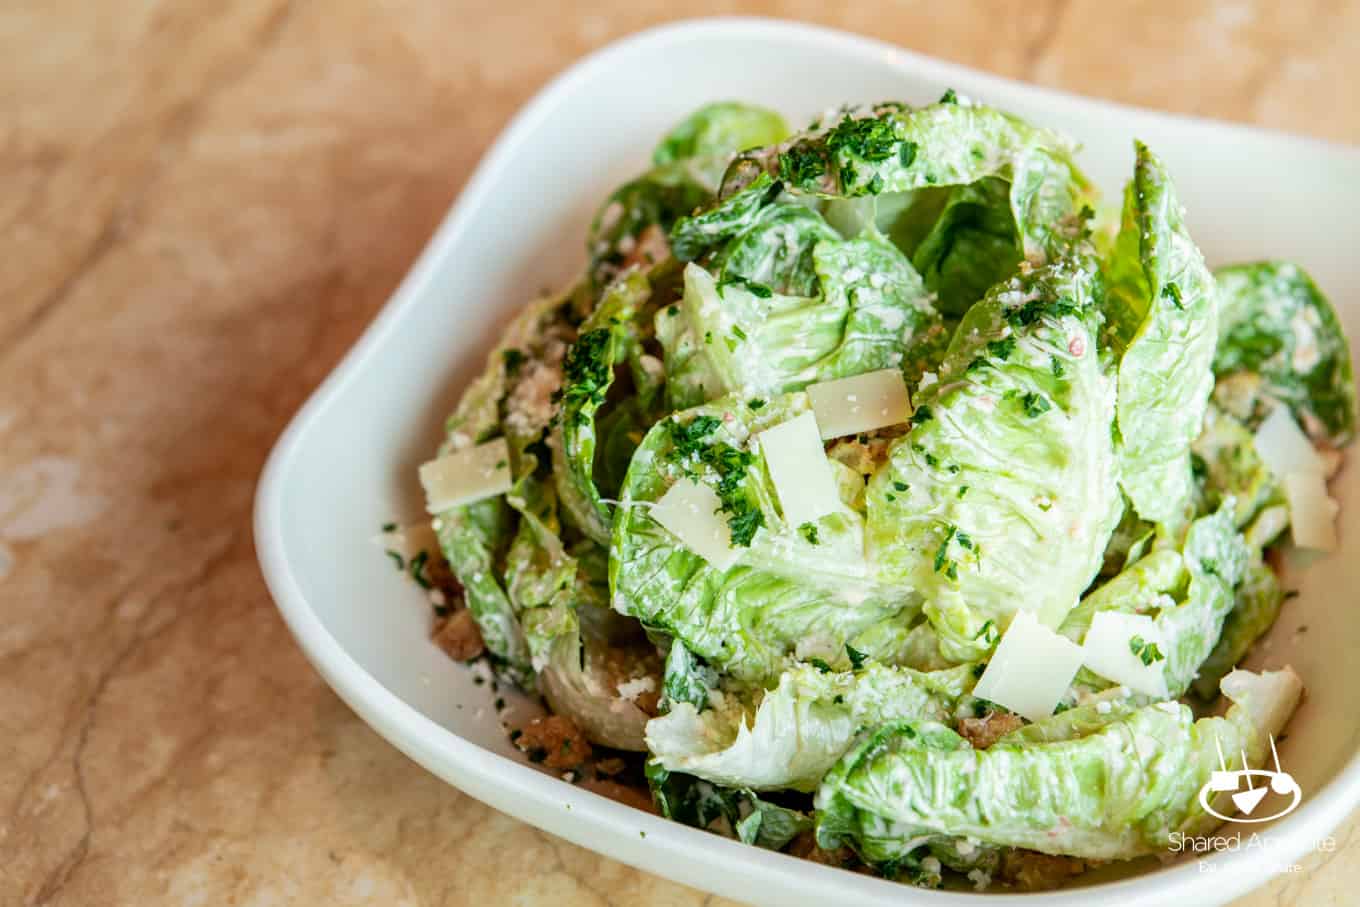 Spicy Caesar Salad at The Cheesecake Factory | sharedappetite.com